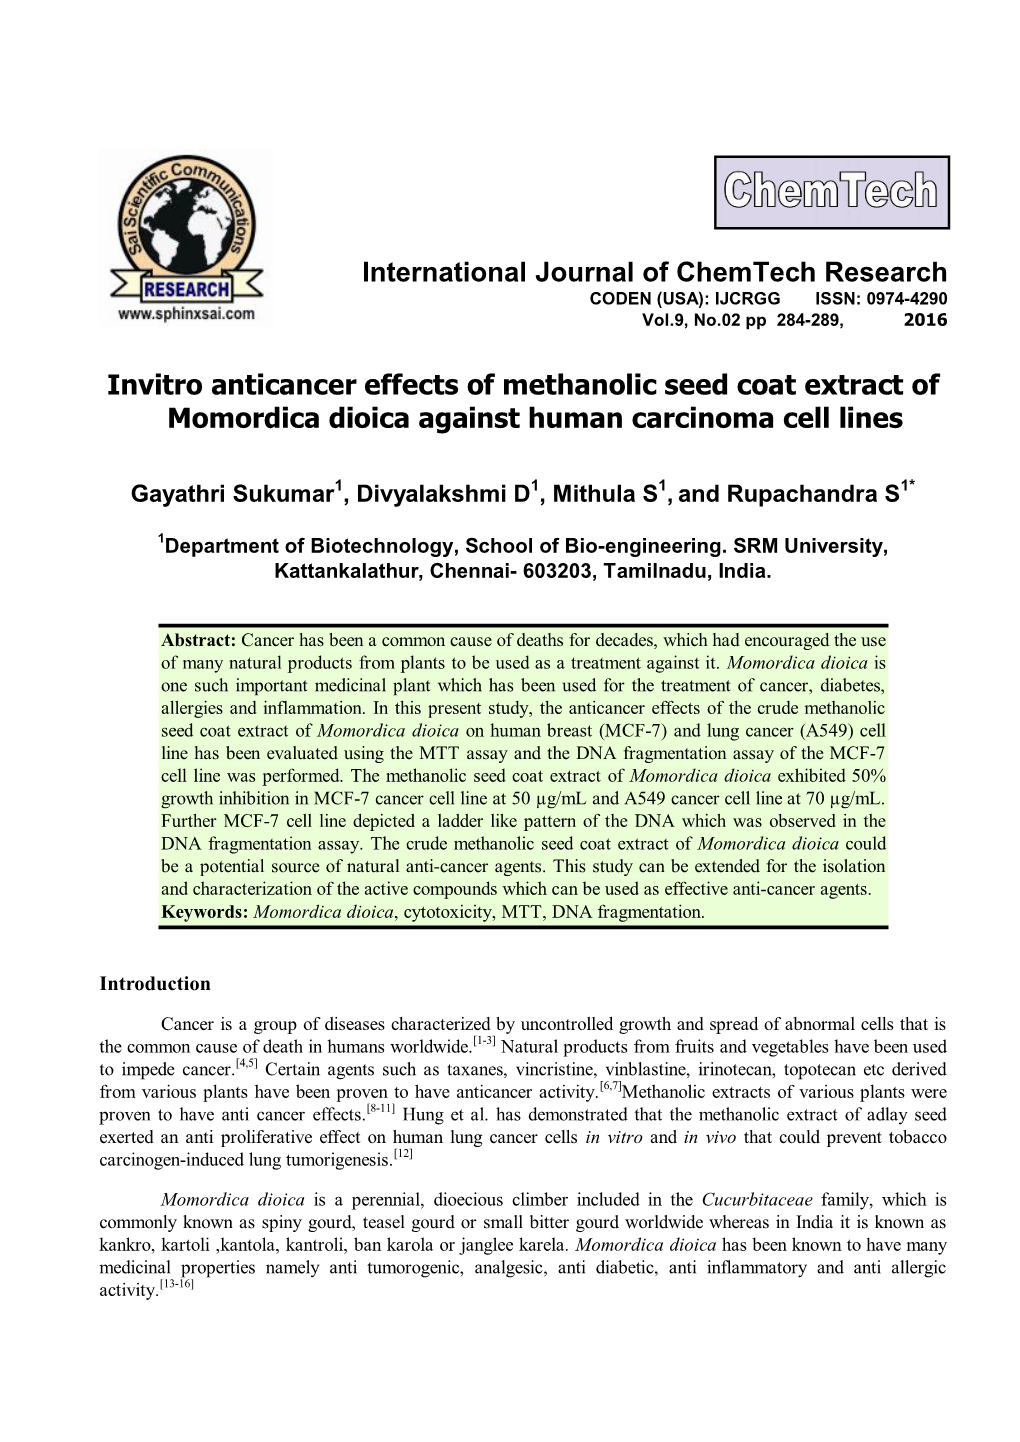 Invitro Anticancer Effects of Methanolic Seed Coat Extract of Momordica Dioica Against Human Carcinoma Cell Lines